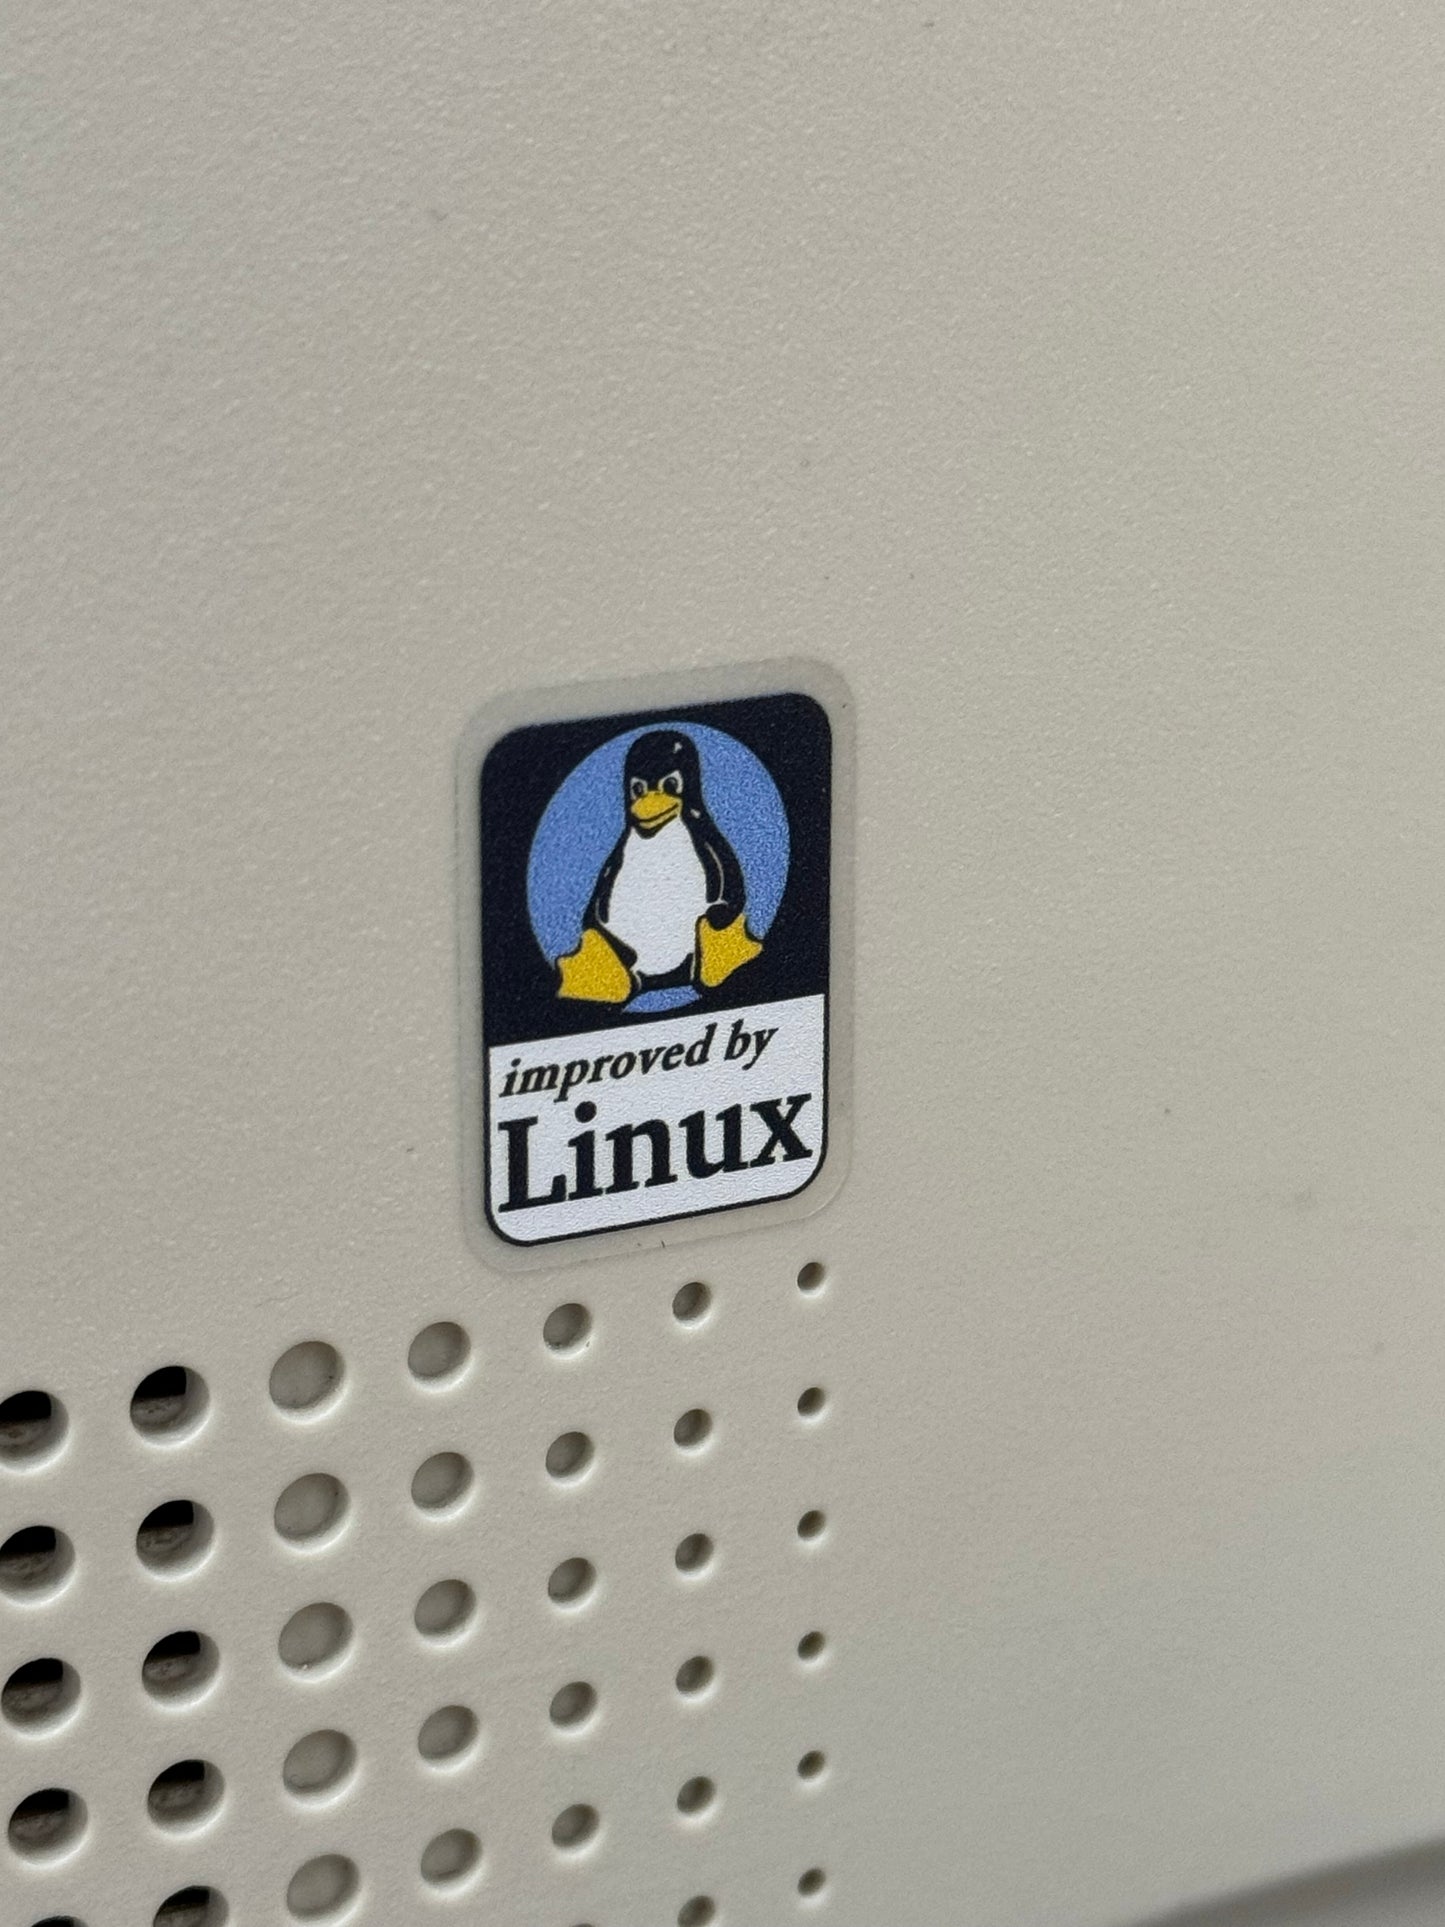 Linux Improved “Angry” Tux Color Penguin Logo Case Badge Sticker - Clear